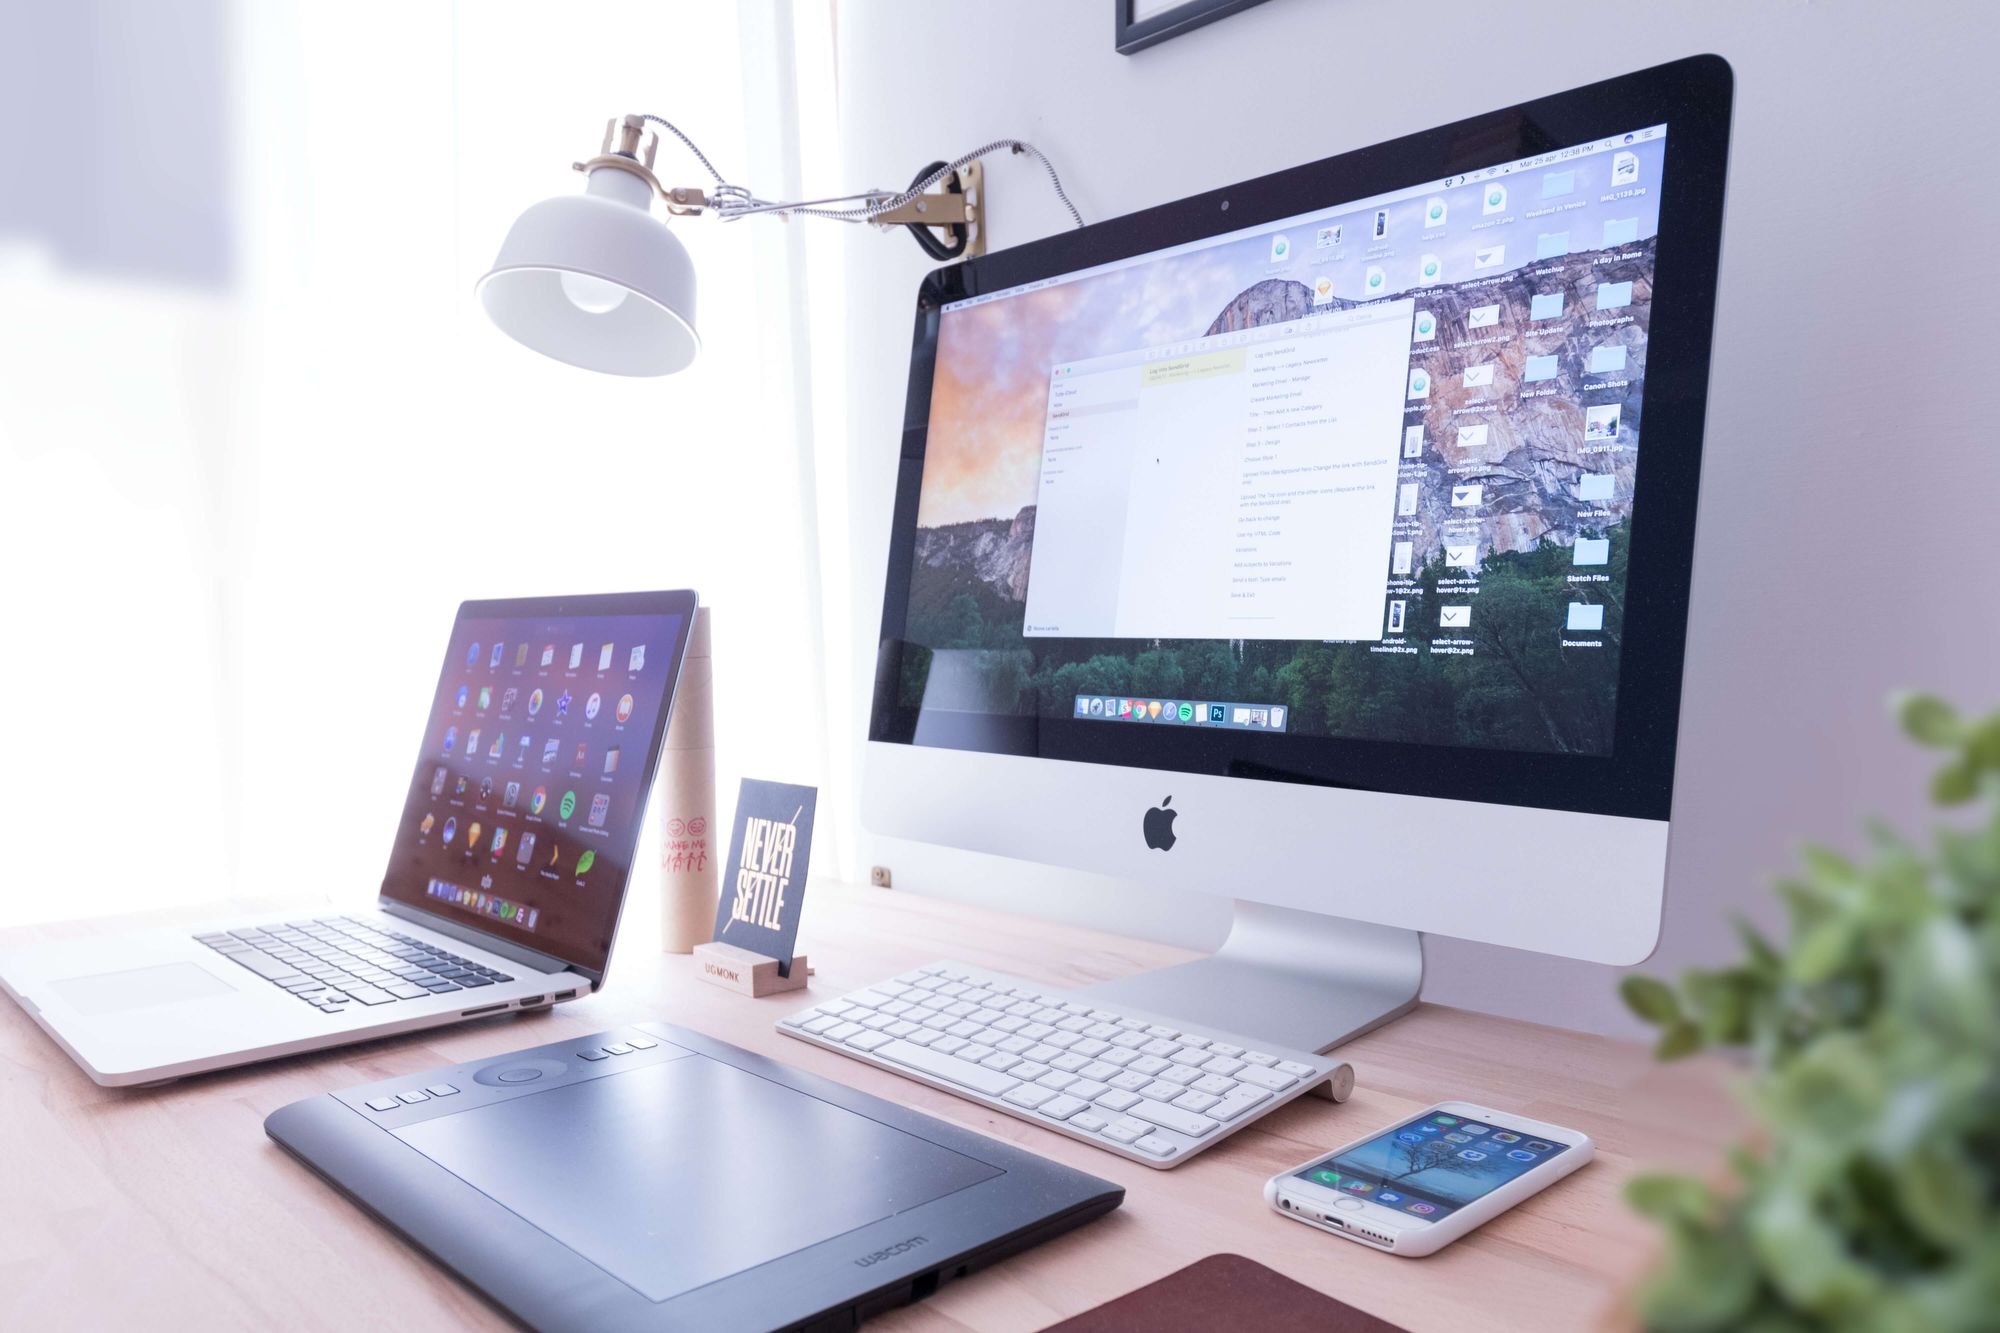 An image of an iMac, Macbook and iPhone